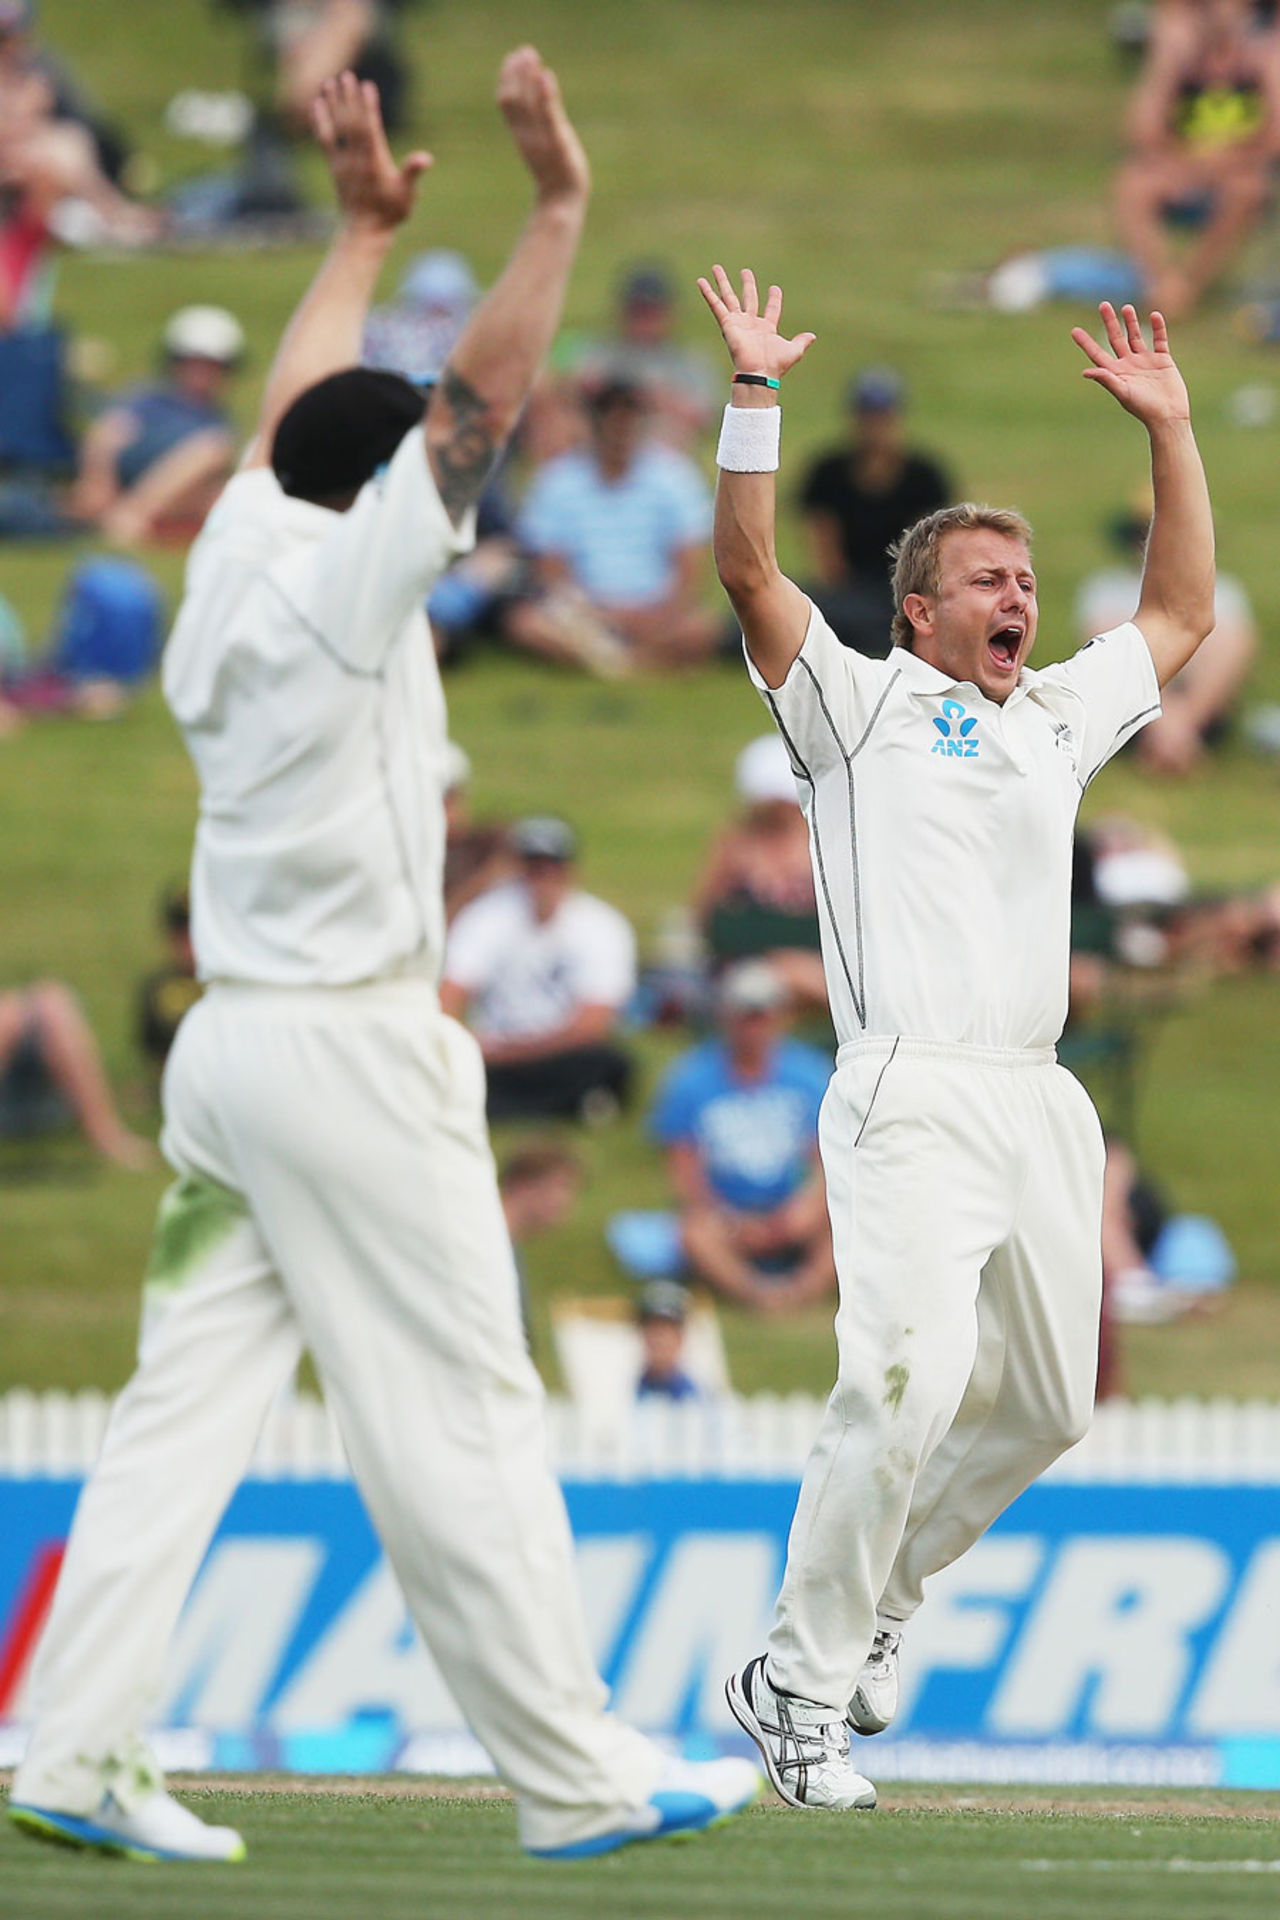 Neil Wagner is overjoyed after getting a wicket, New Zealand v West Indies, 3rd Test, Hamilton, 3rd day, December 21, 2013